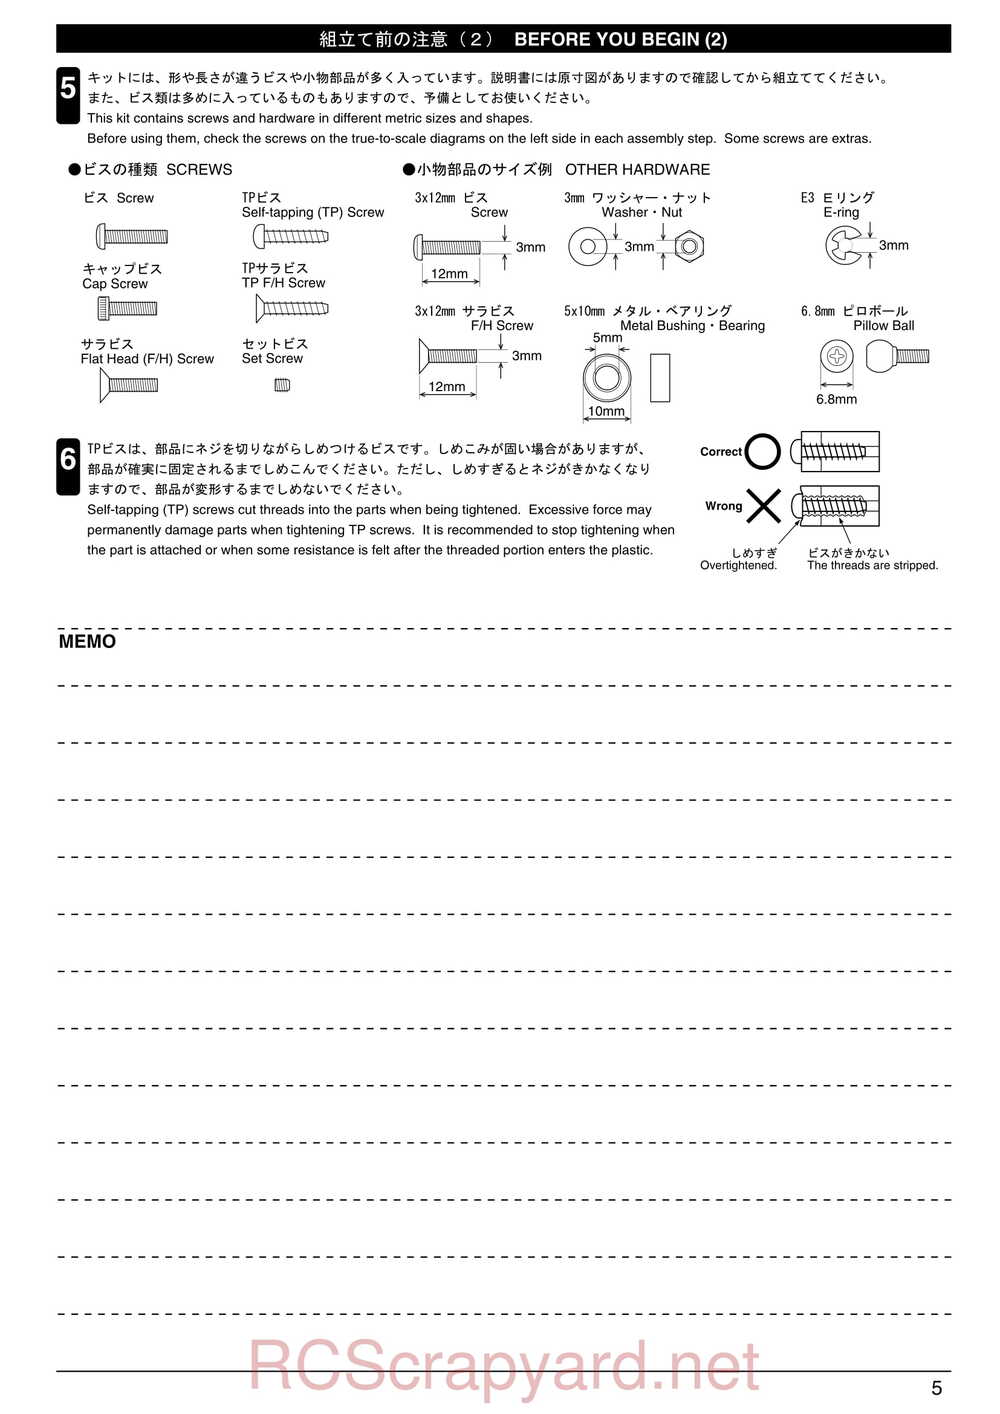 Kyosho - 30522b - Twin-Forcec-SP - Manual - Page 05